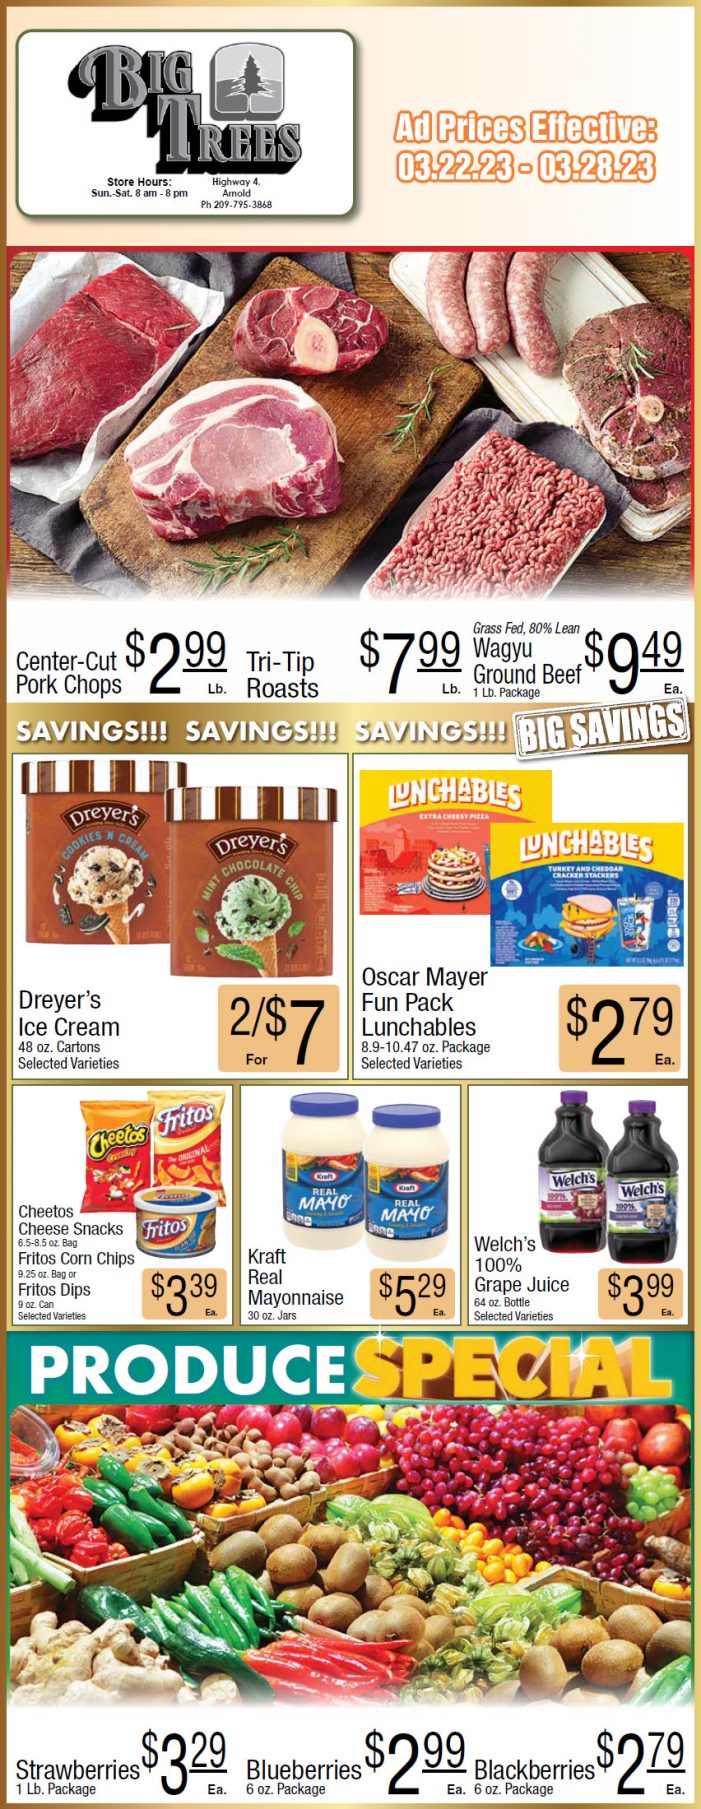 Big Trees Market Weekly Ad & Grocery Specials March 22 – 28th!  Shop Local & Save!!